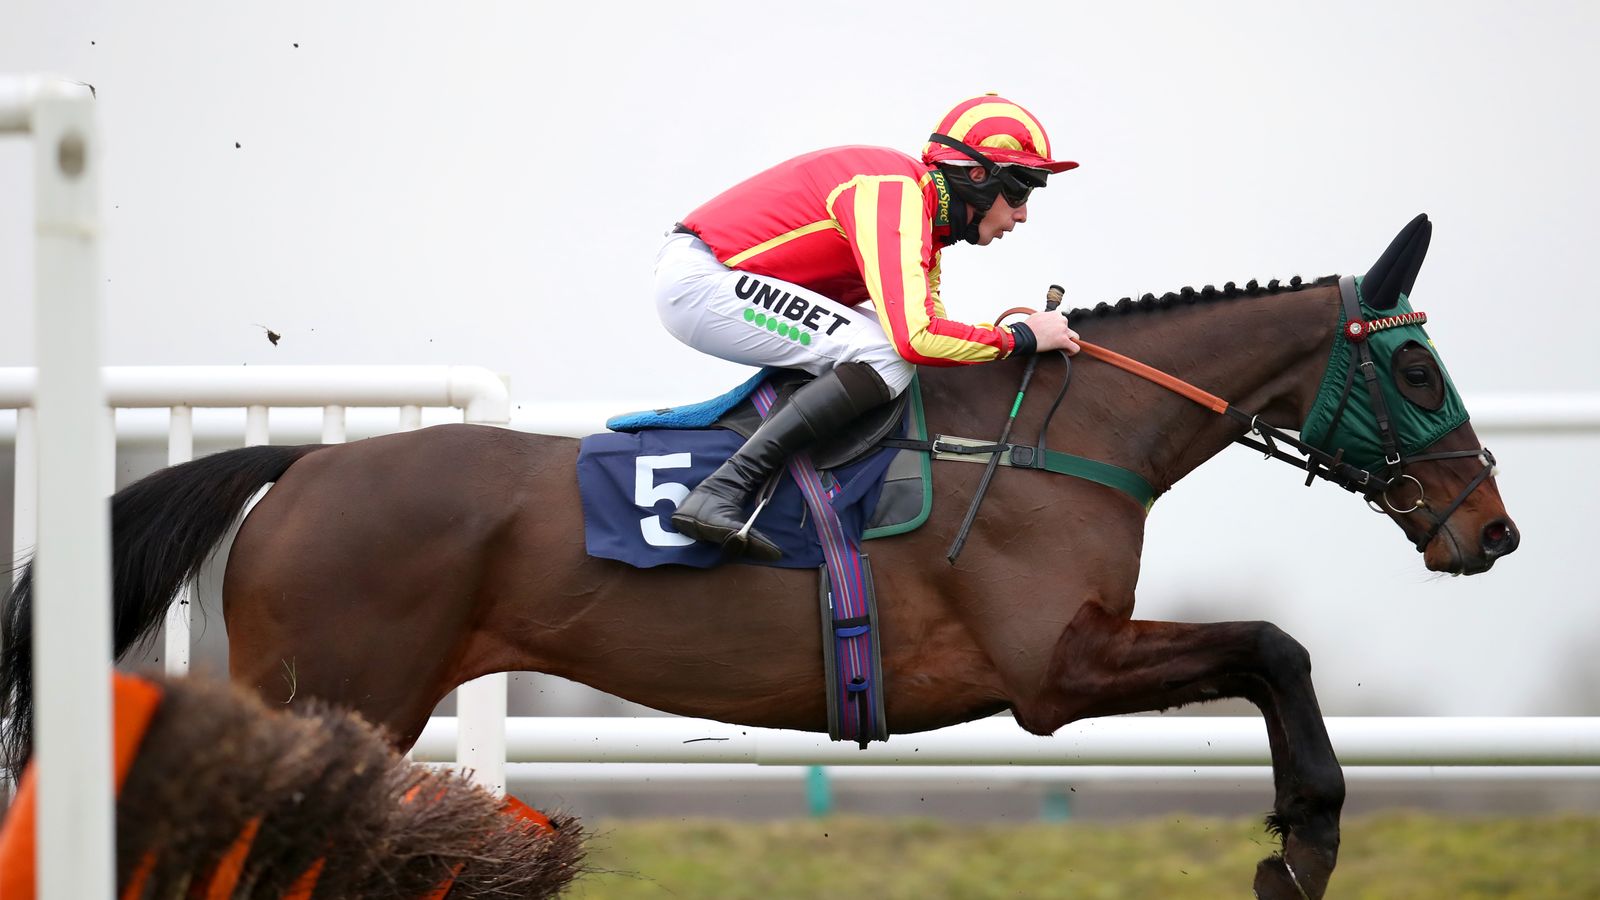 Today on Sky Sports Racing: Grand National runner Top Ville Ben returns in competitive Lingfield feature